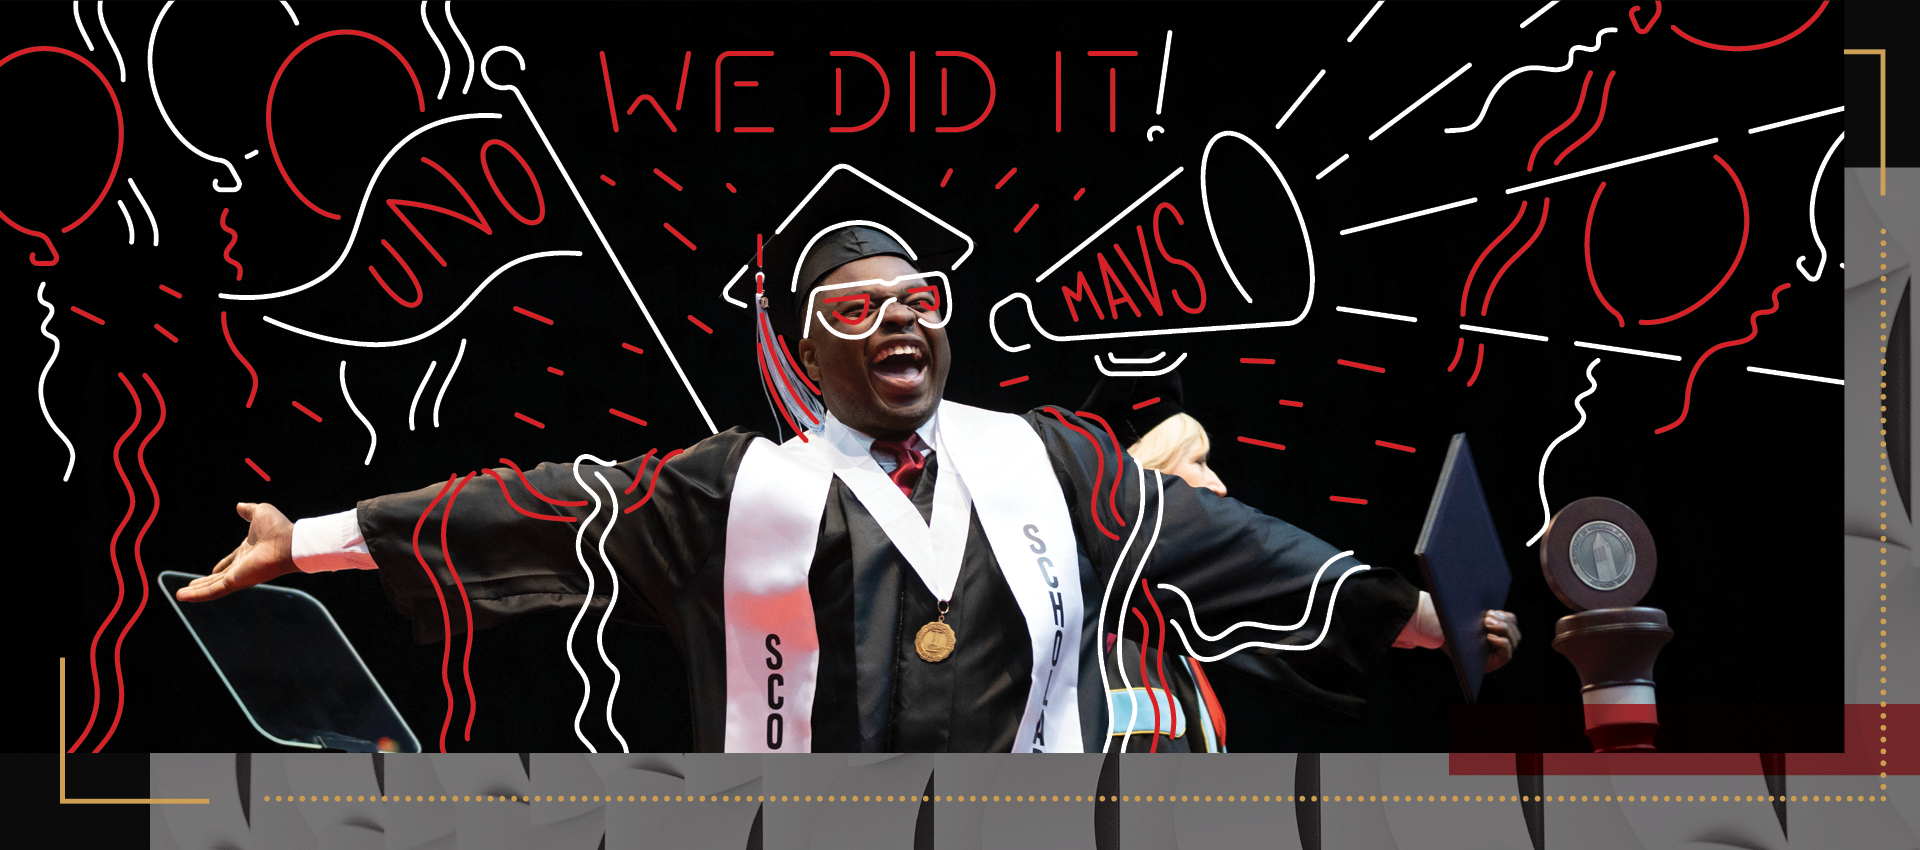 Graduate in regalia with arms outstretched holding diploma and the words "we did it"